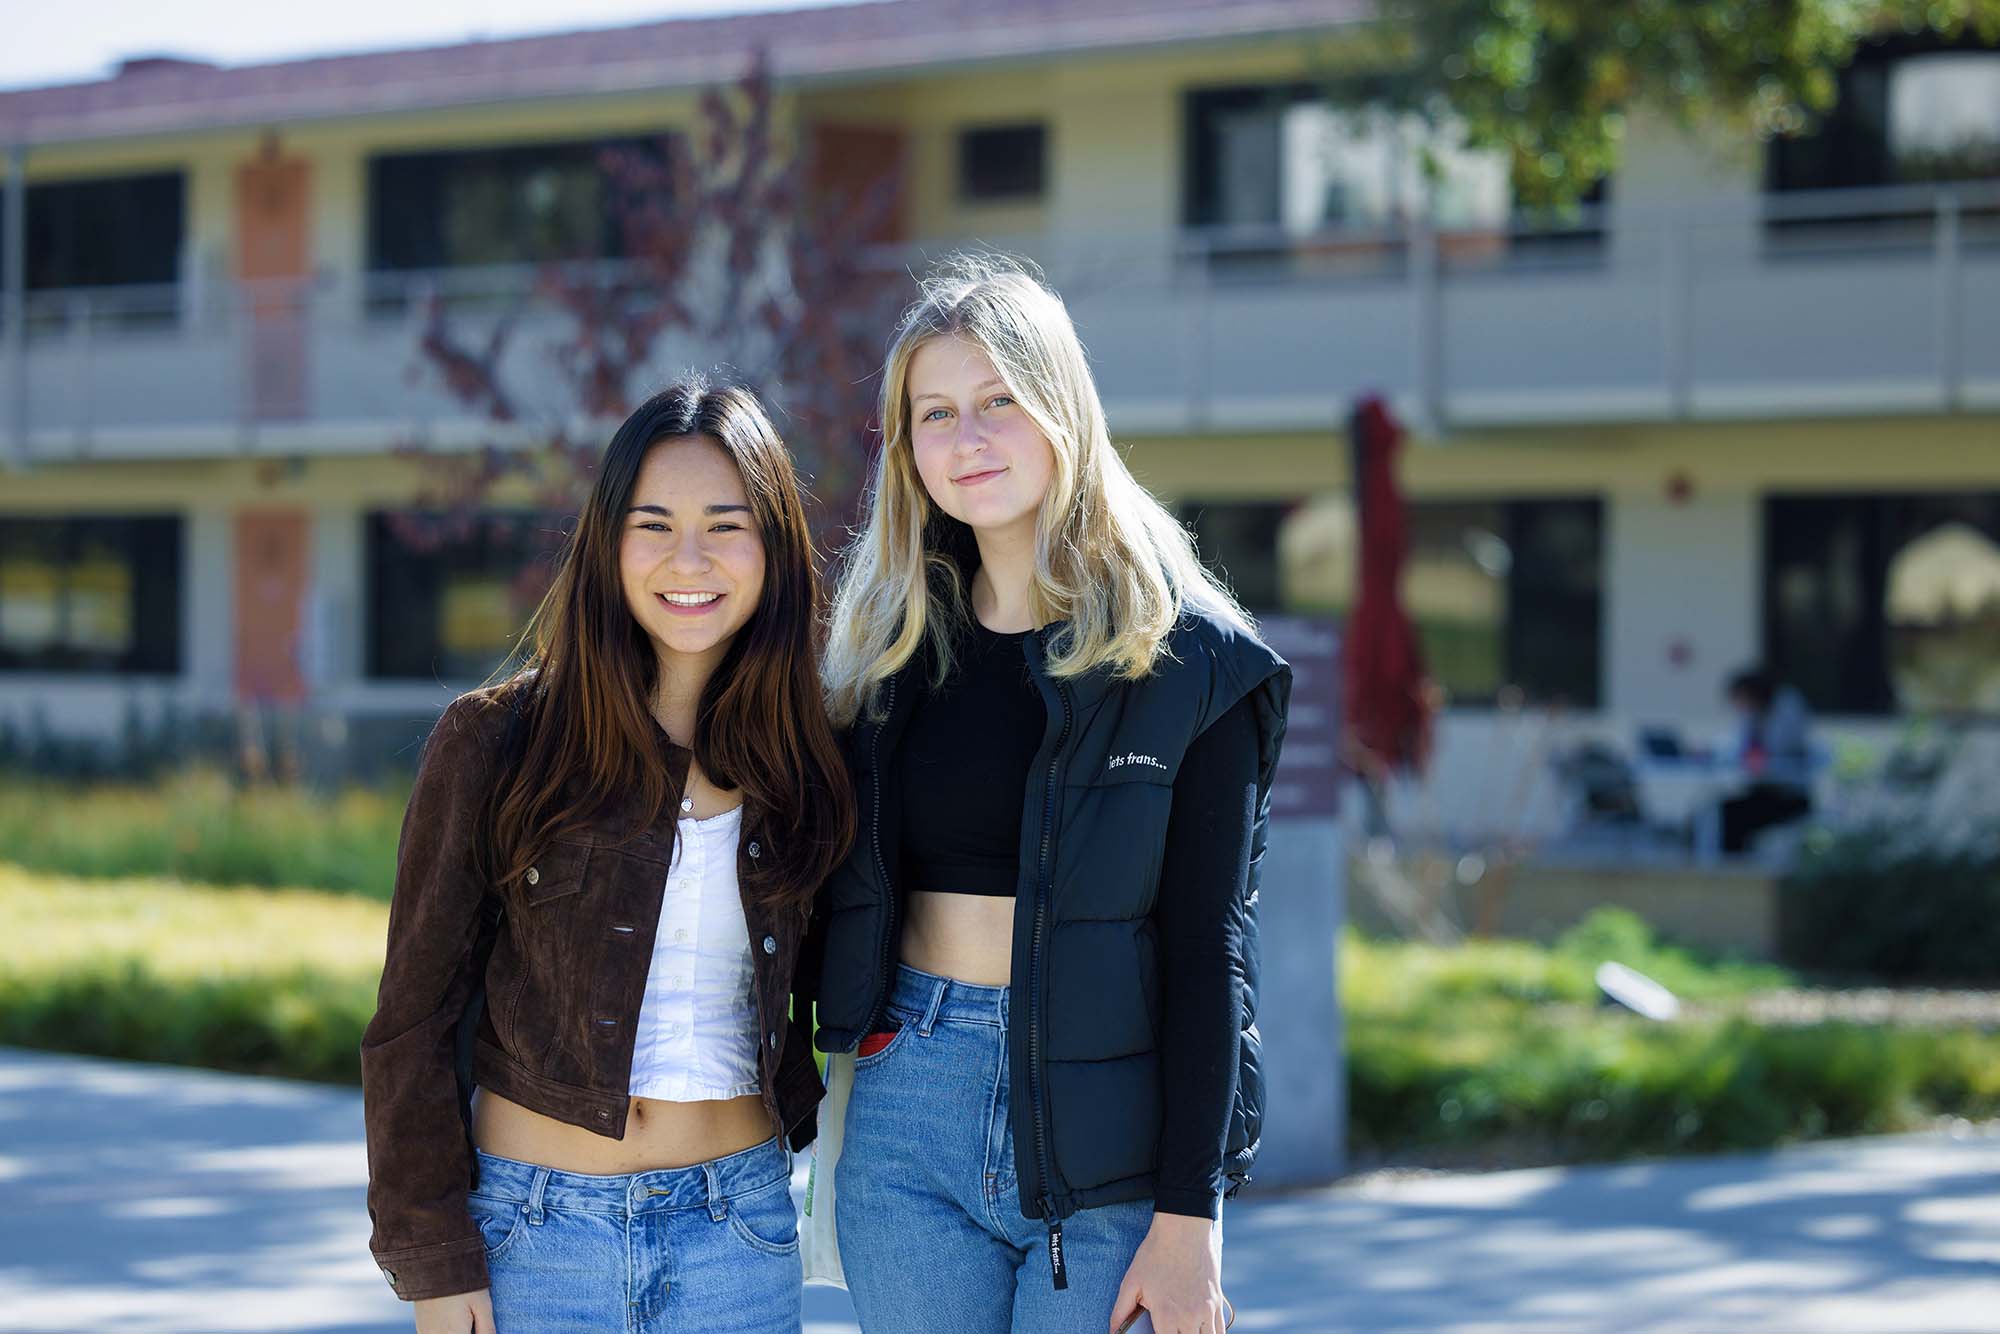 Two female students posing together.